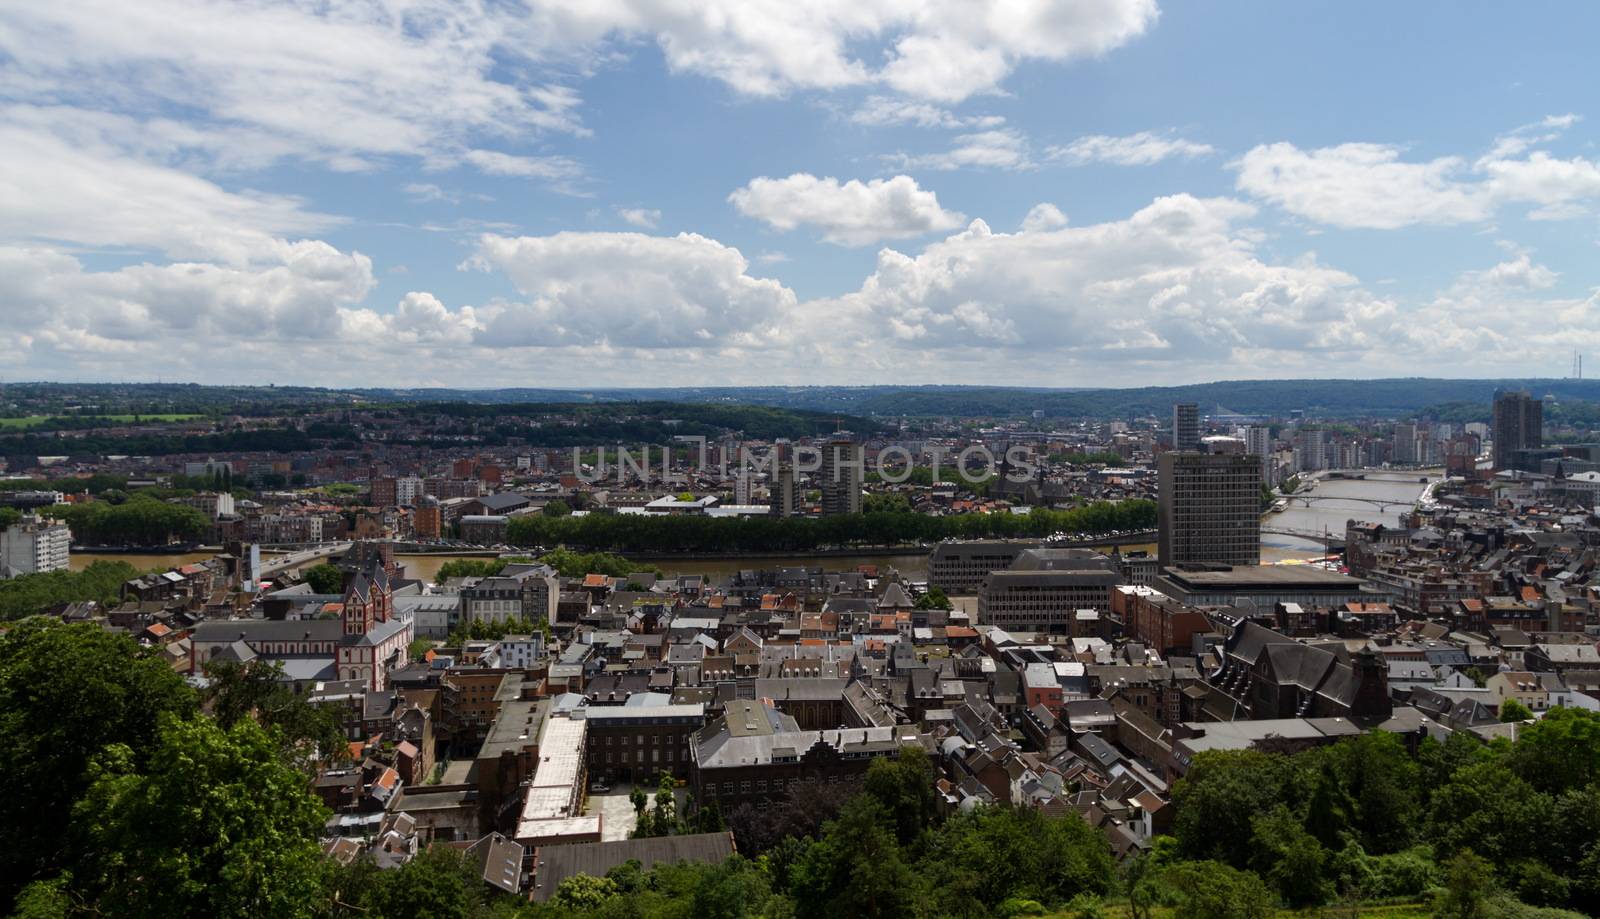 Very nice view of the city of Liege in Belgium and sky